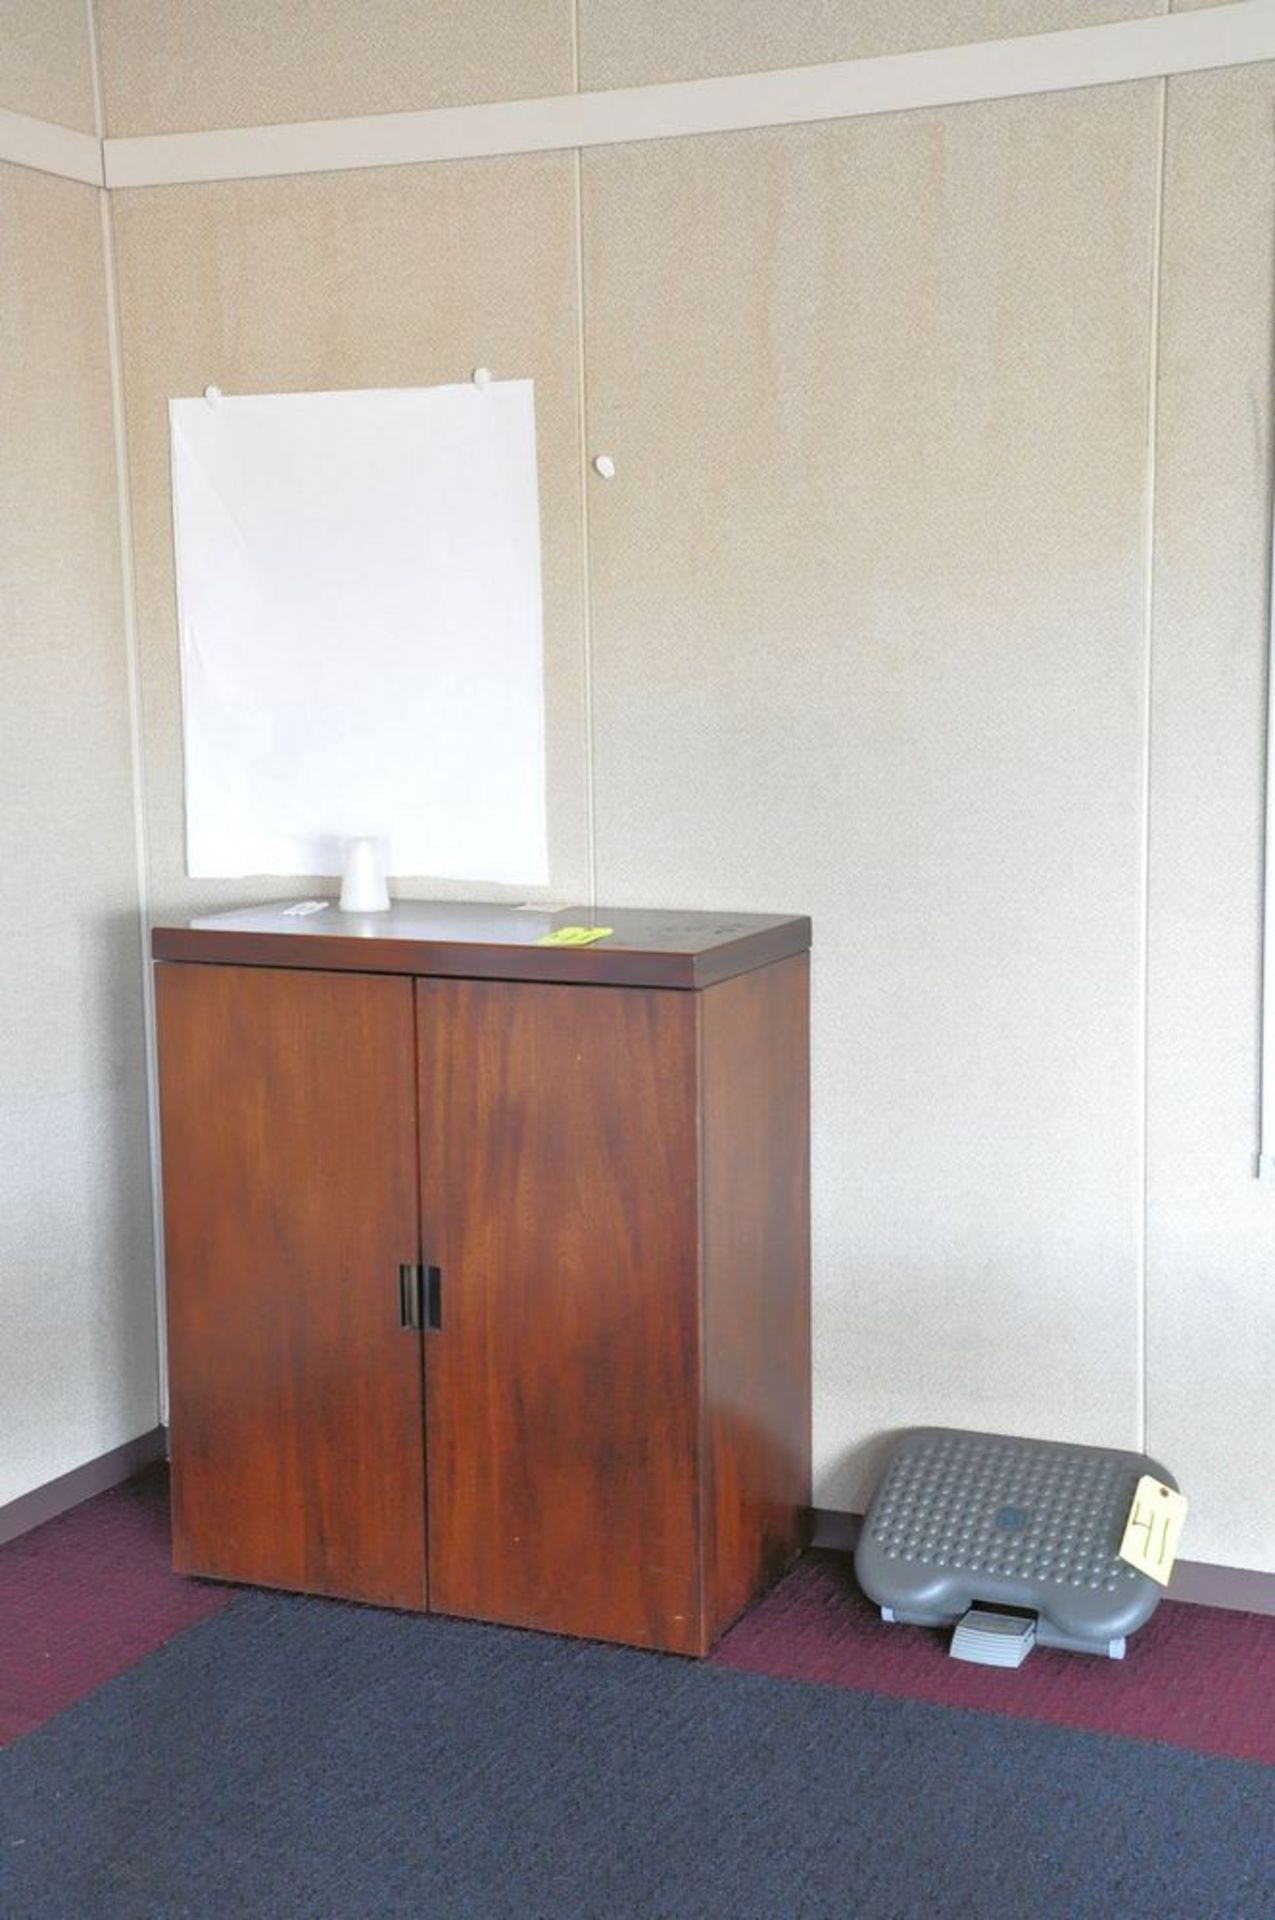 Lot-(1) Conference Table, with (1) 2-Door Storage Cabinet, (1) Foot Rest, and (1) Dry Erase Board in - Image 3 of 3